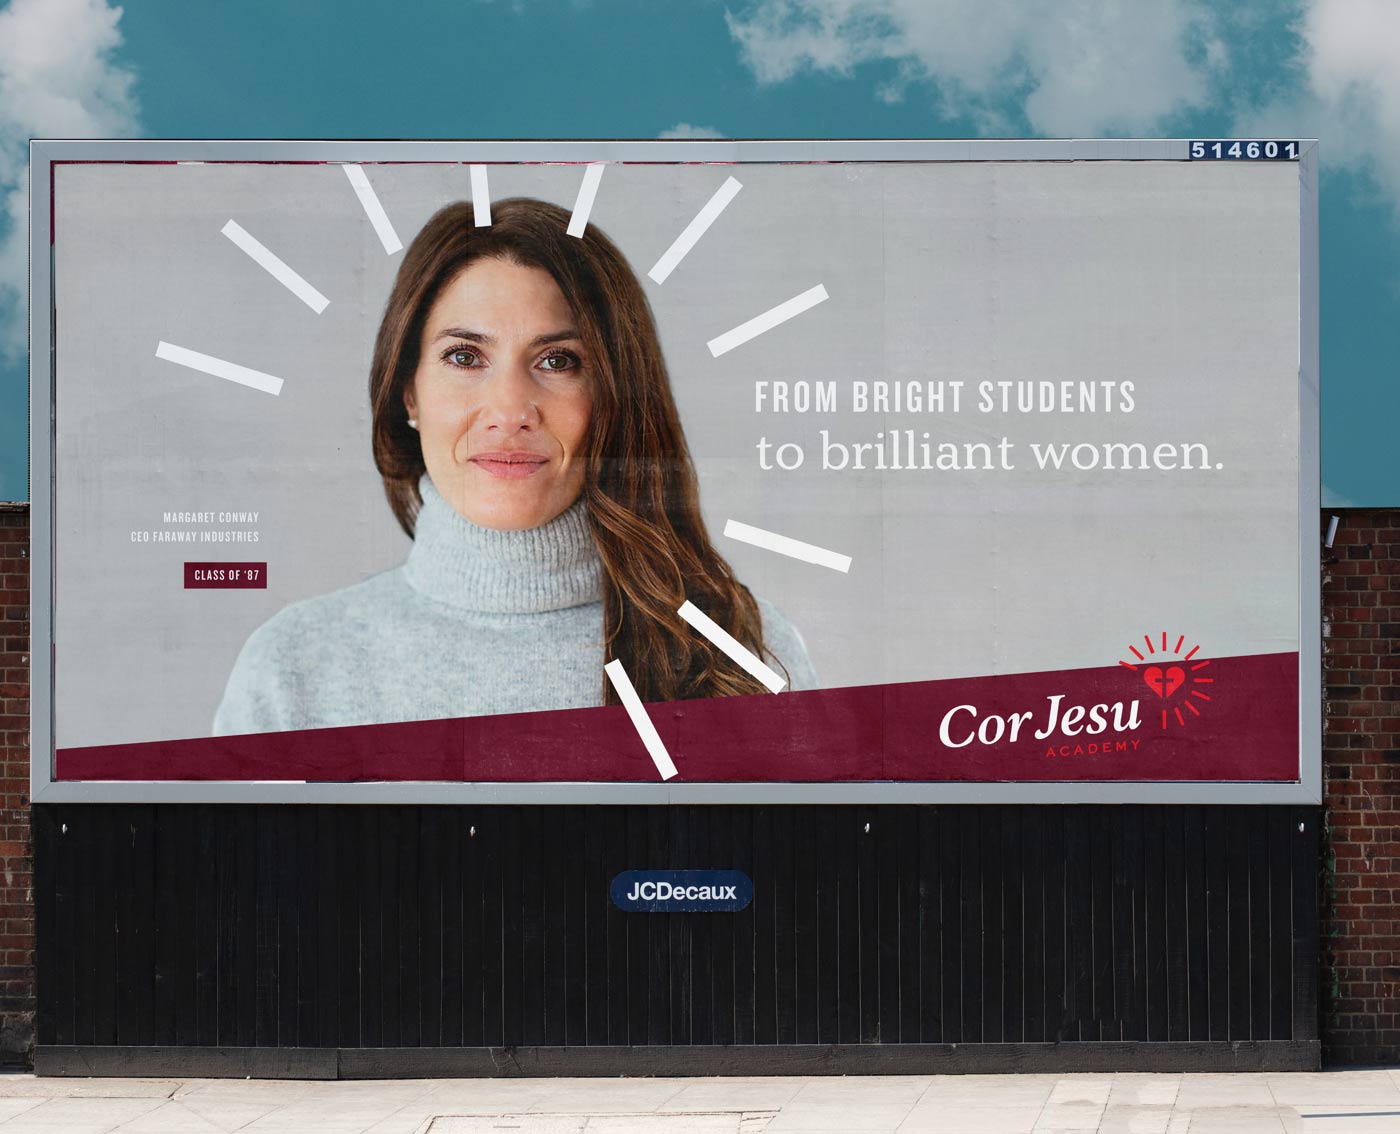 A billboard showing Cor Jesu's new branding with a photo of an alumna and the words "From bright students to brilliant women."